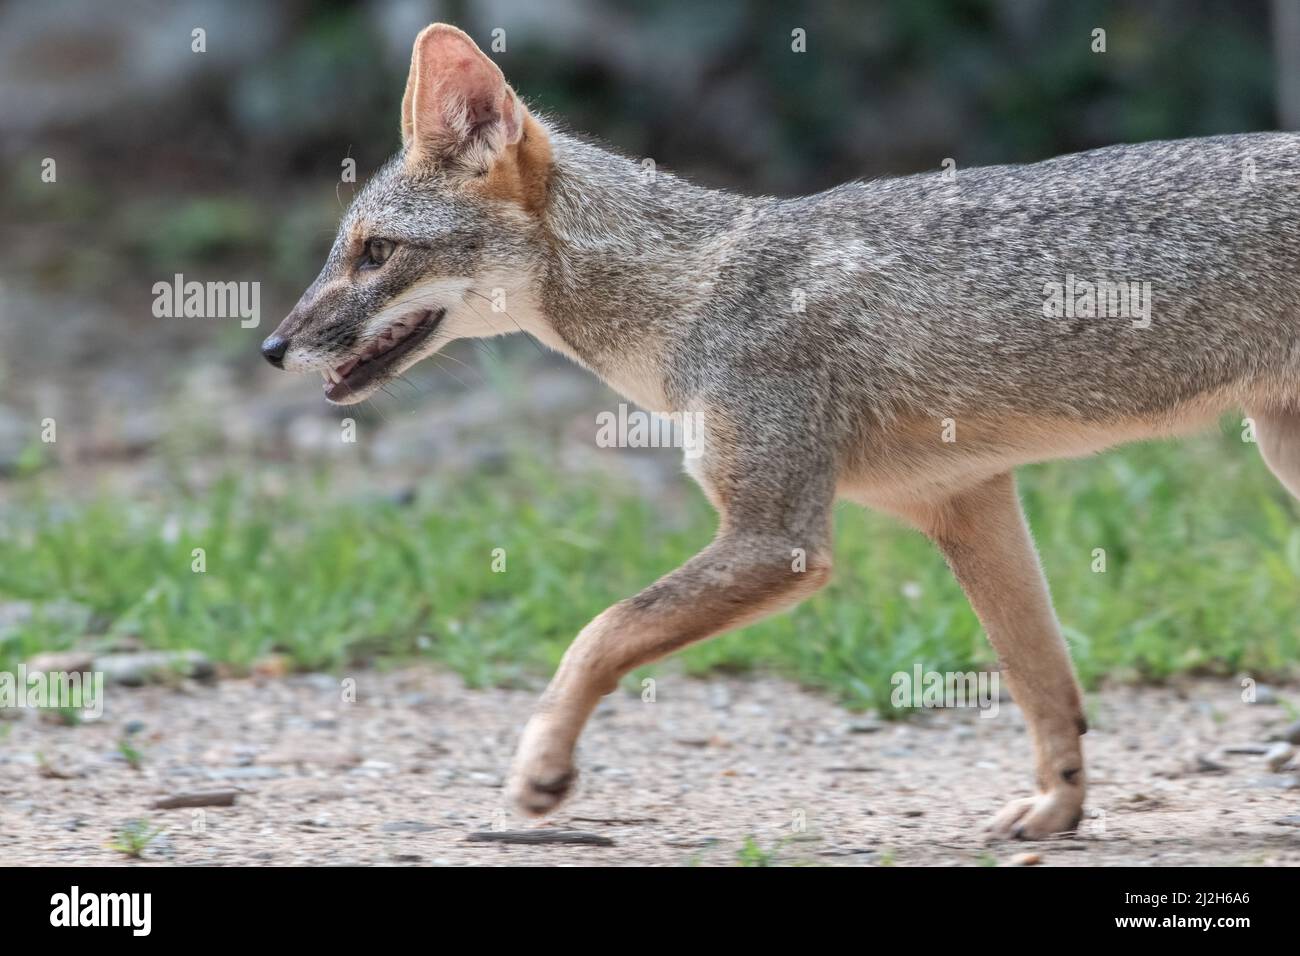 Sechuran fox (Lycalopex sechurae) a small canid endemic to the dry forest of Peru and Ecuador in South America. Stock Photo